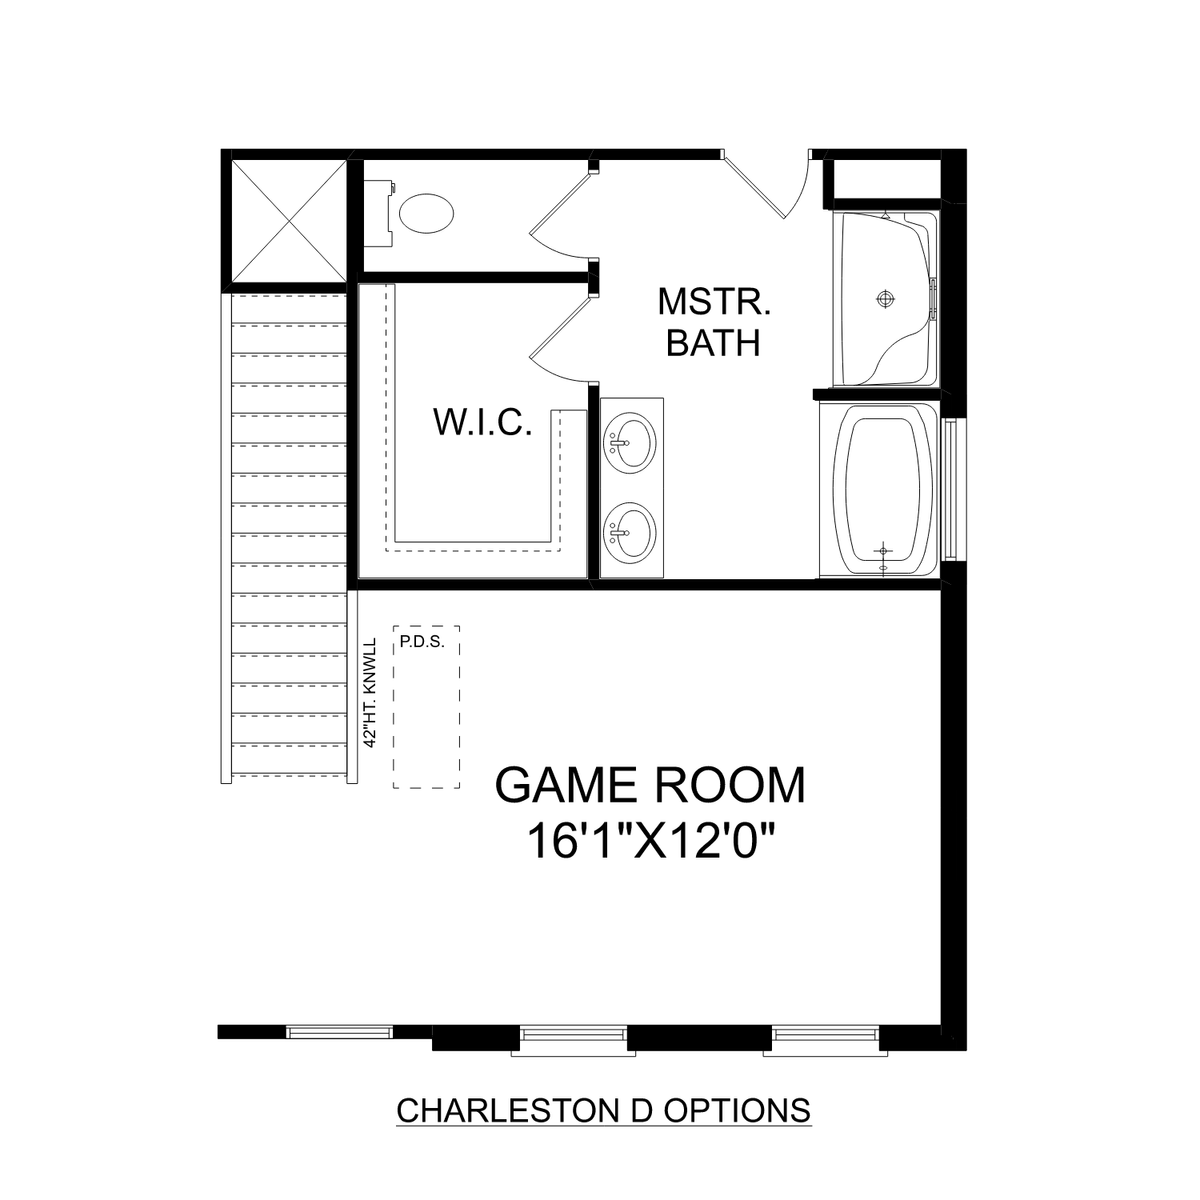 3 - The Charleston D buildable floor plan layout in Davidson Homes' Heritage Lakes community.